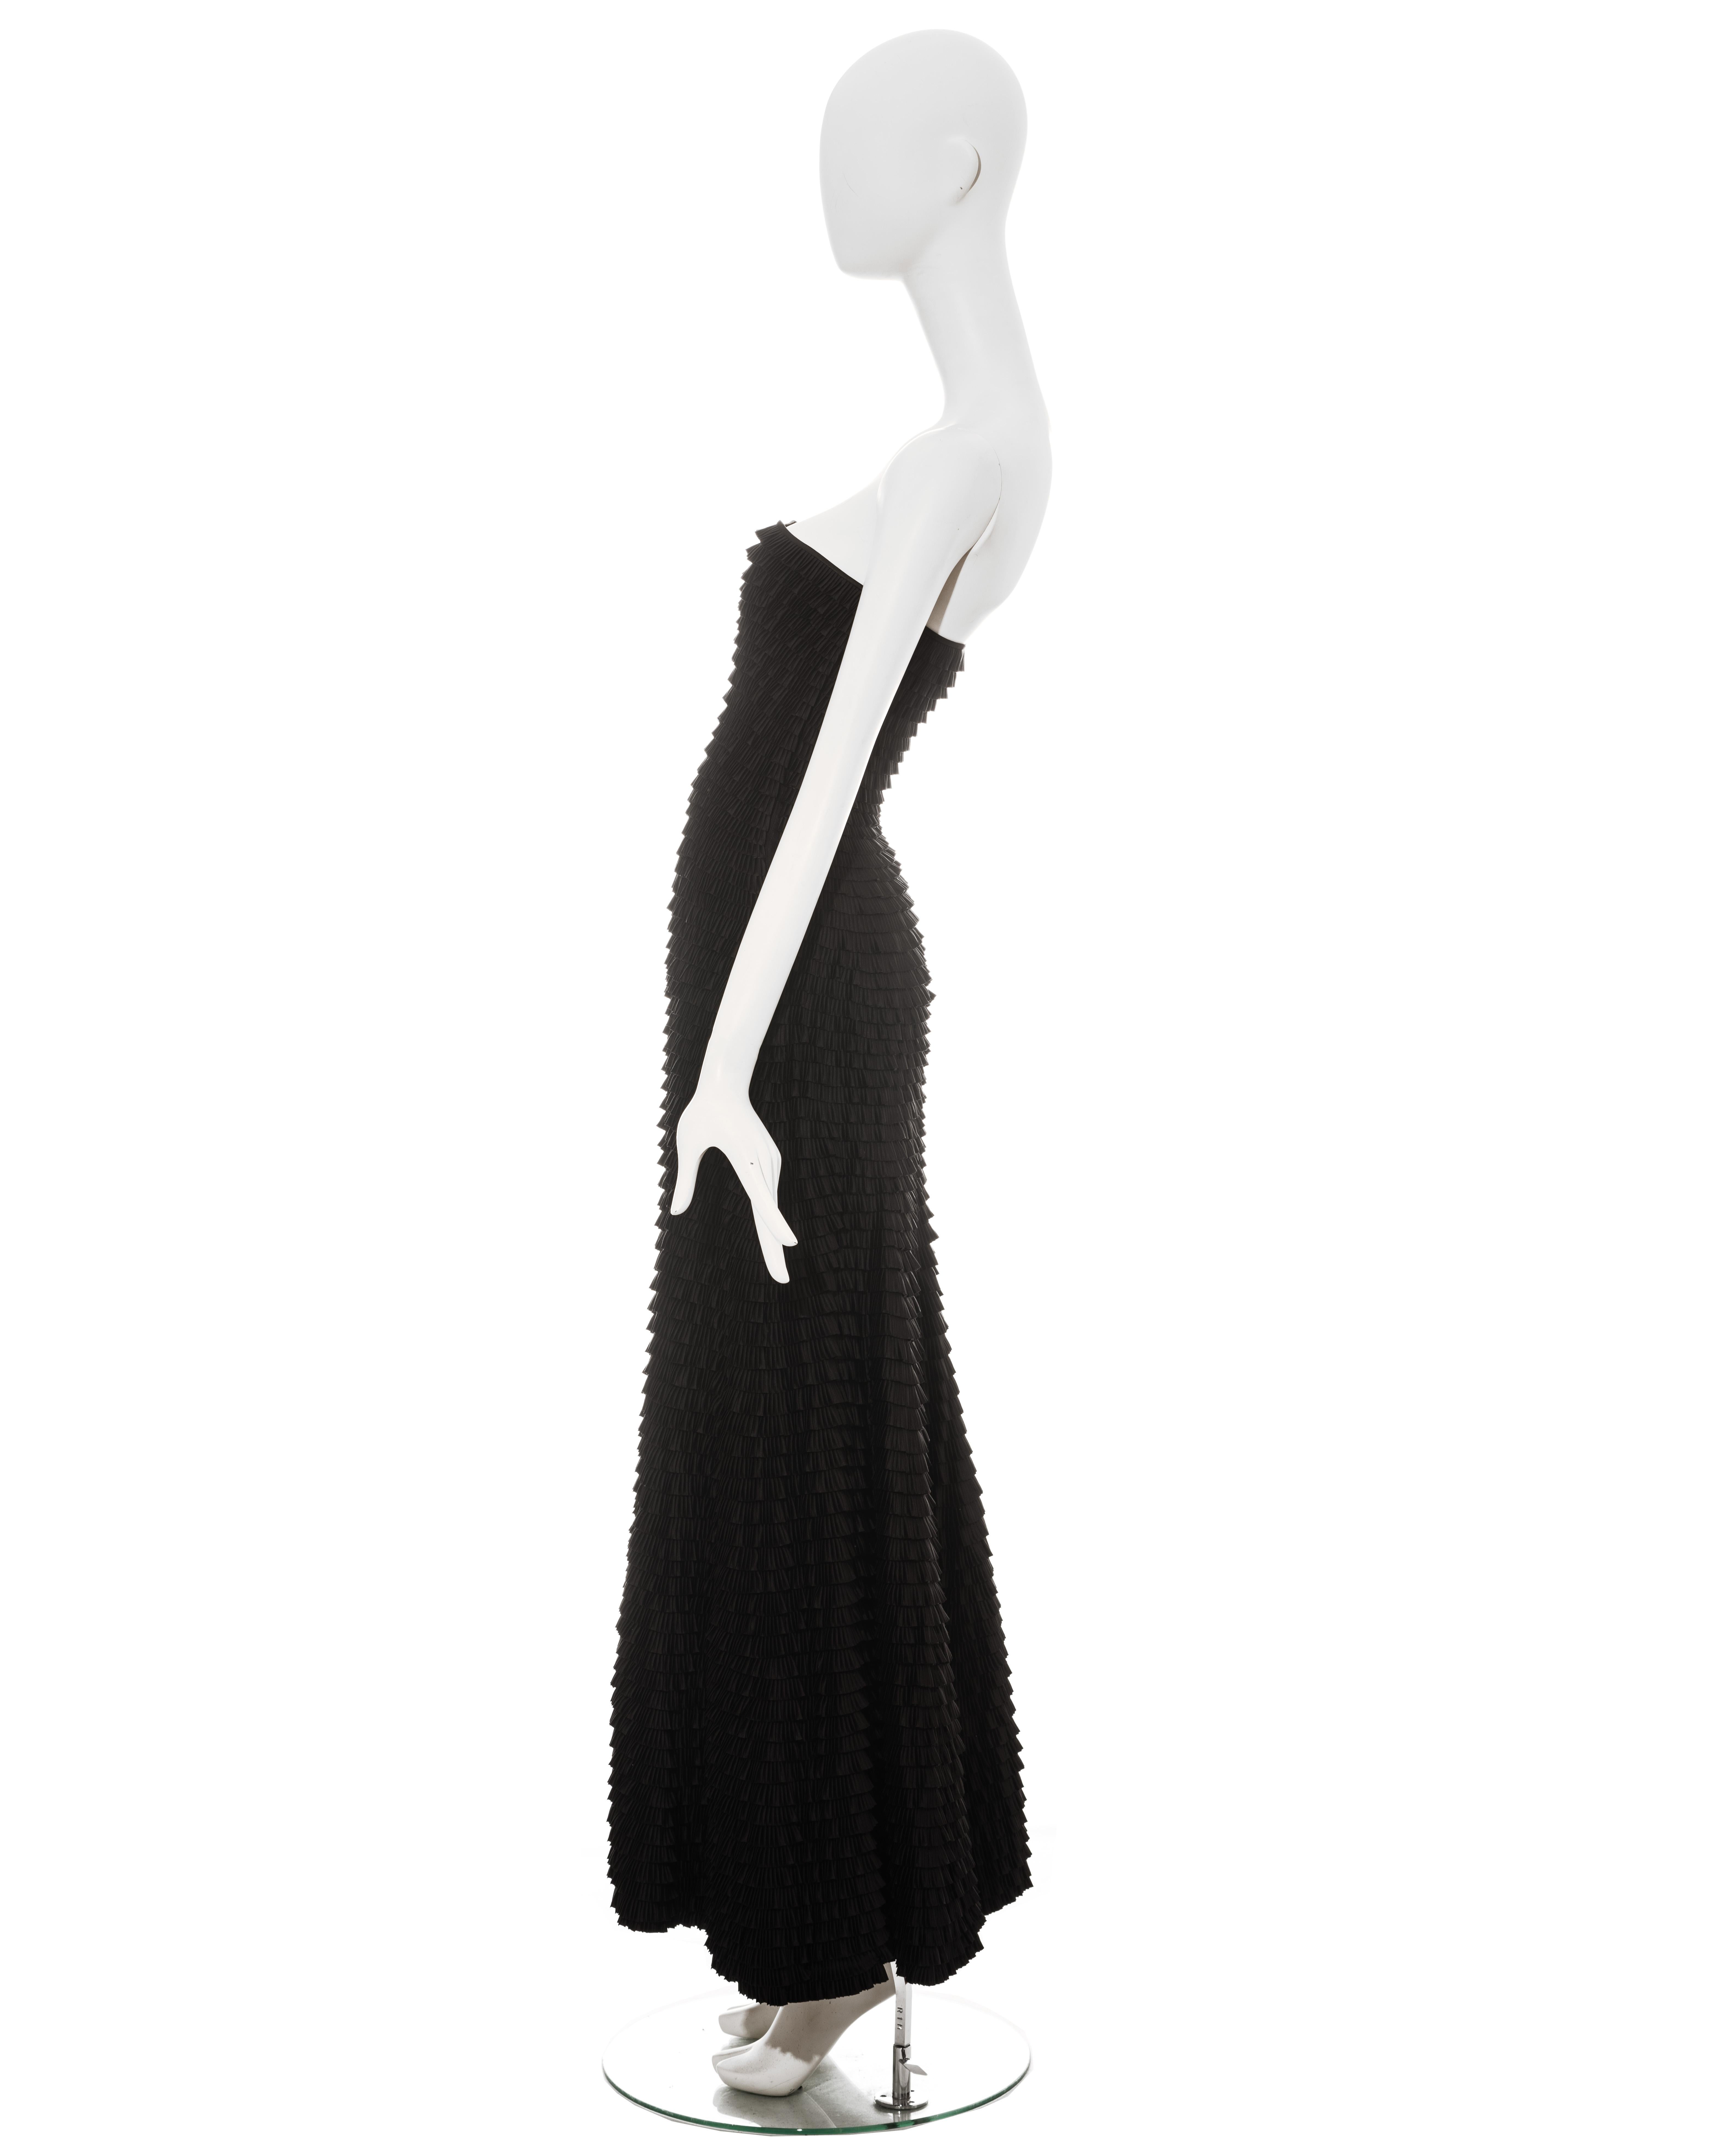 Givenchy by Alexander McQueen black ruffled fishtail evening dress, ss 1999 For Sale 1